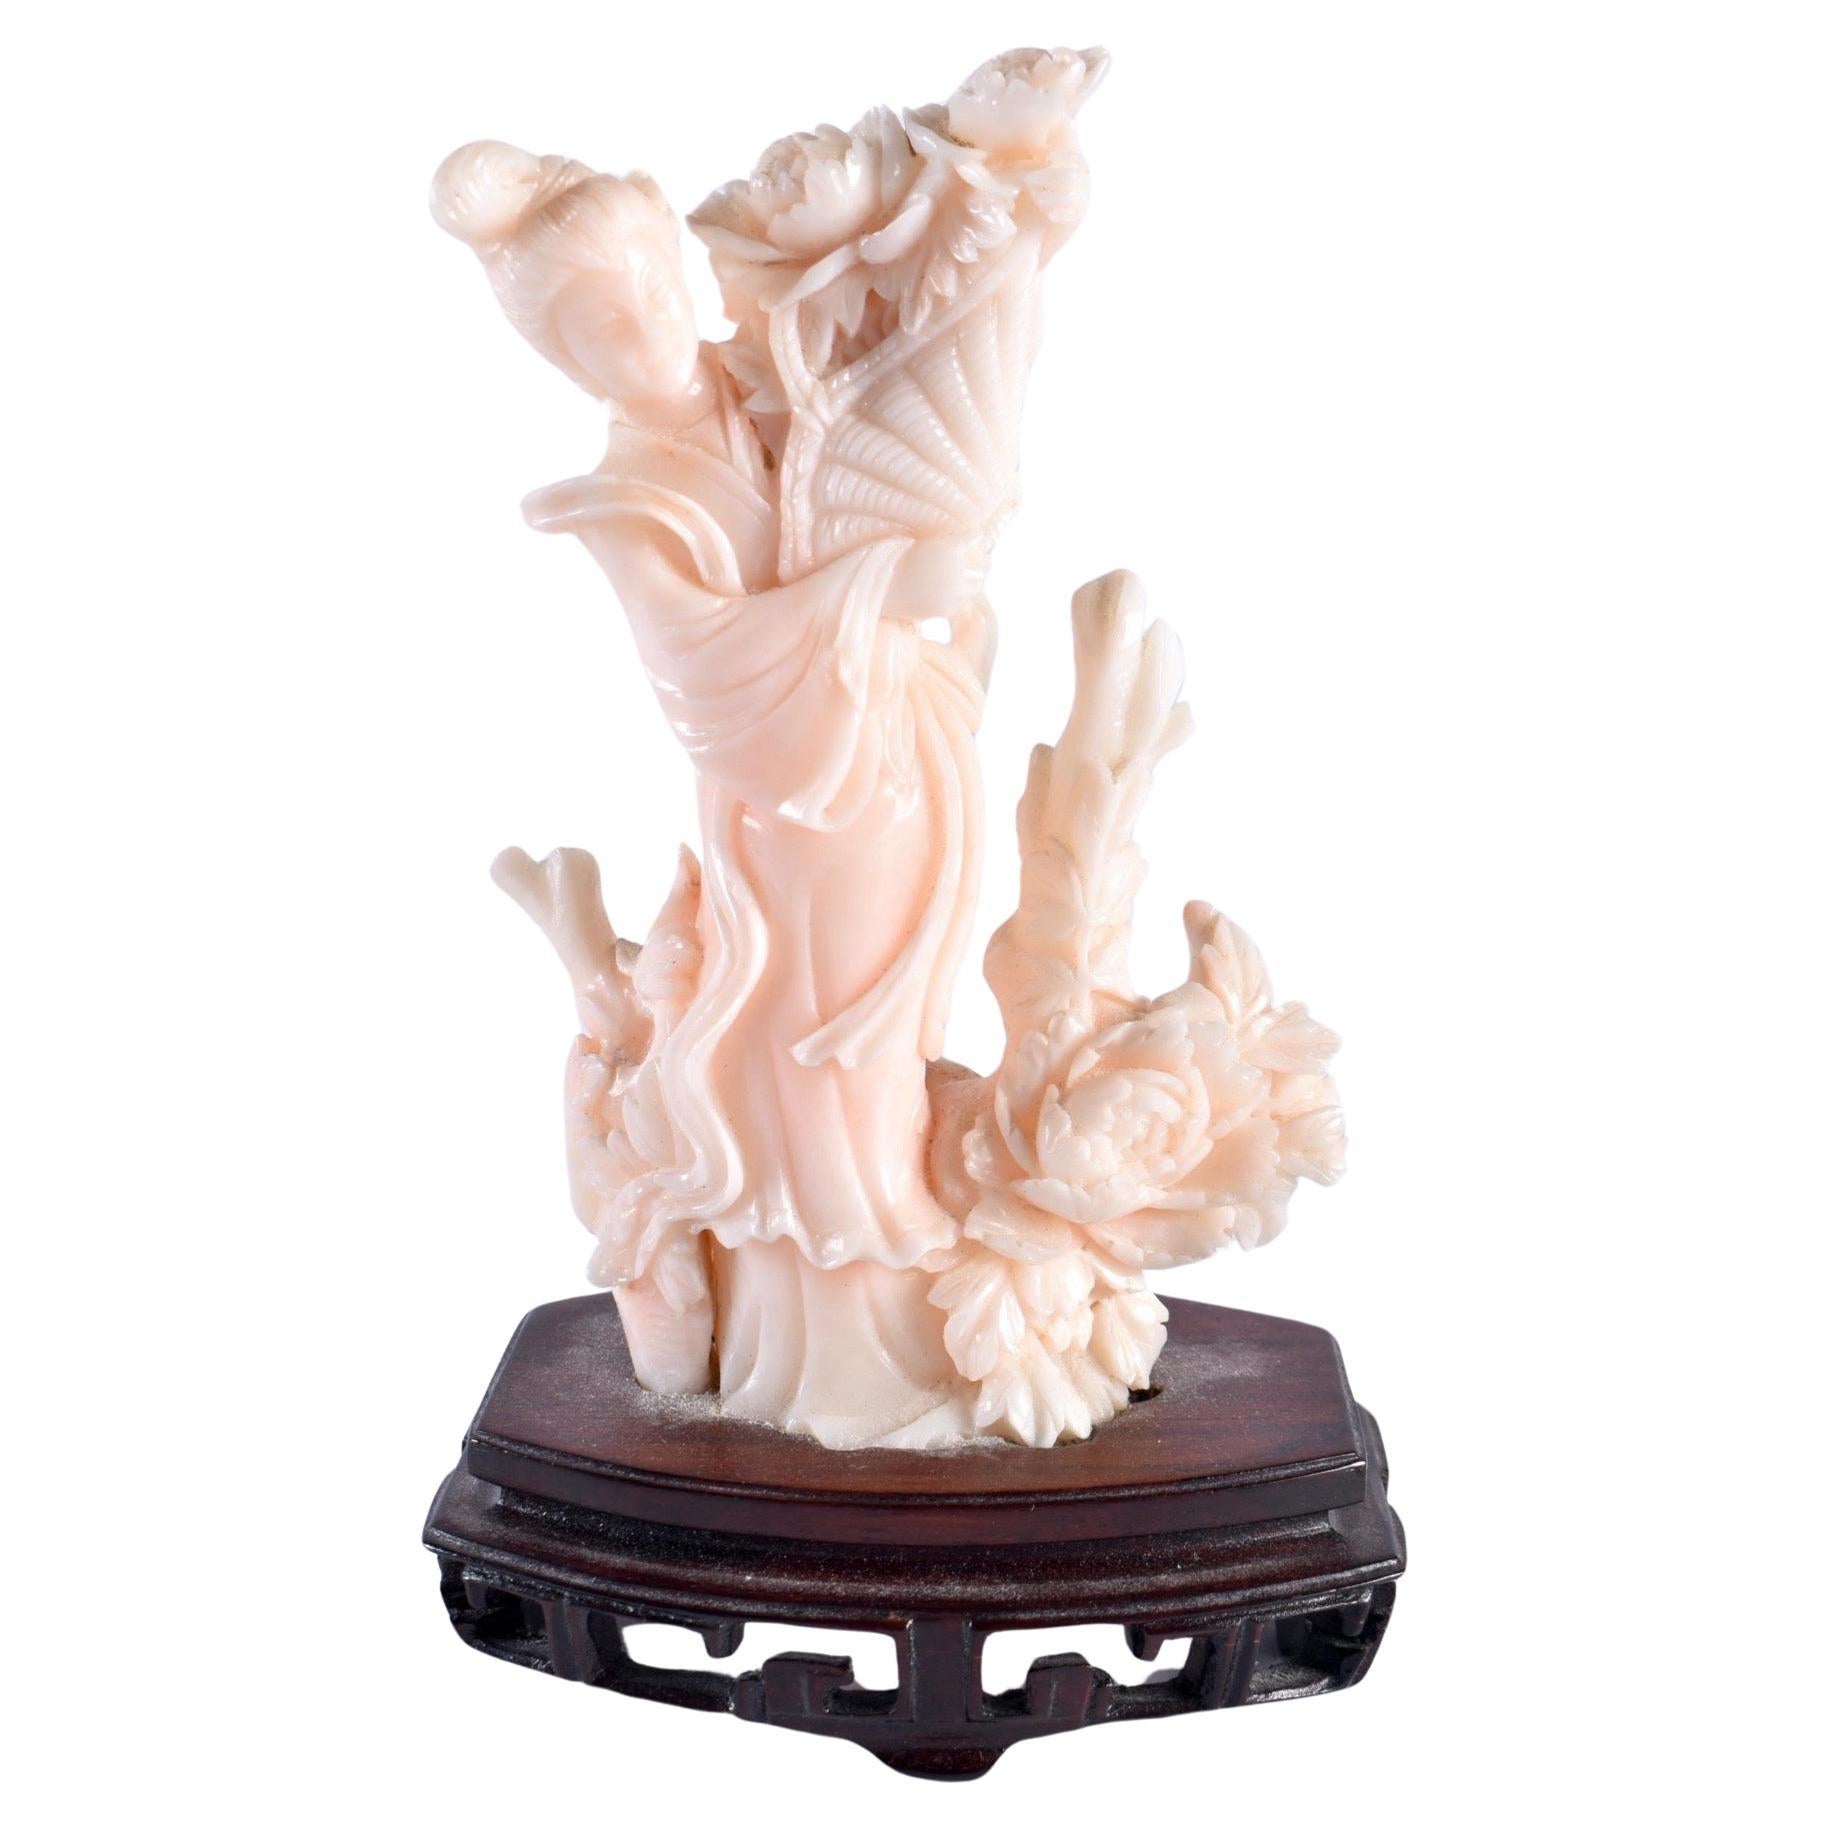 A MAGNIFICENT CHINESE CARVED CORAL FIGURE OF A BEAUTY. Late Qing Dynasty 